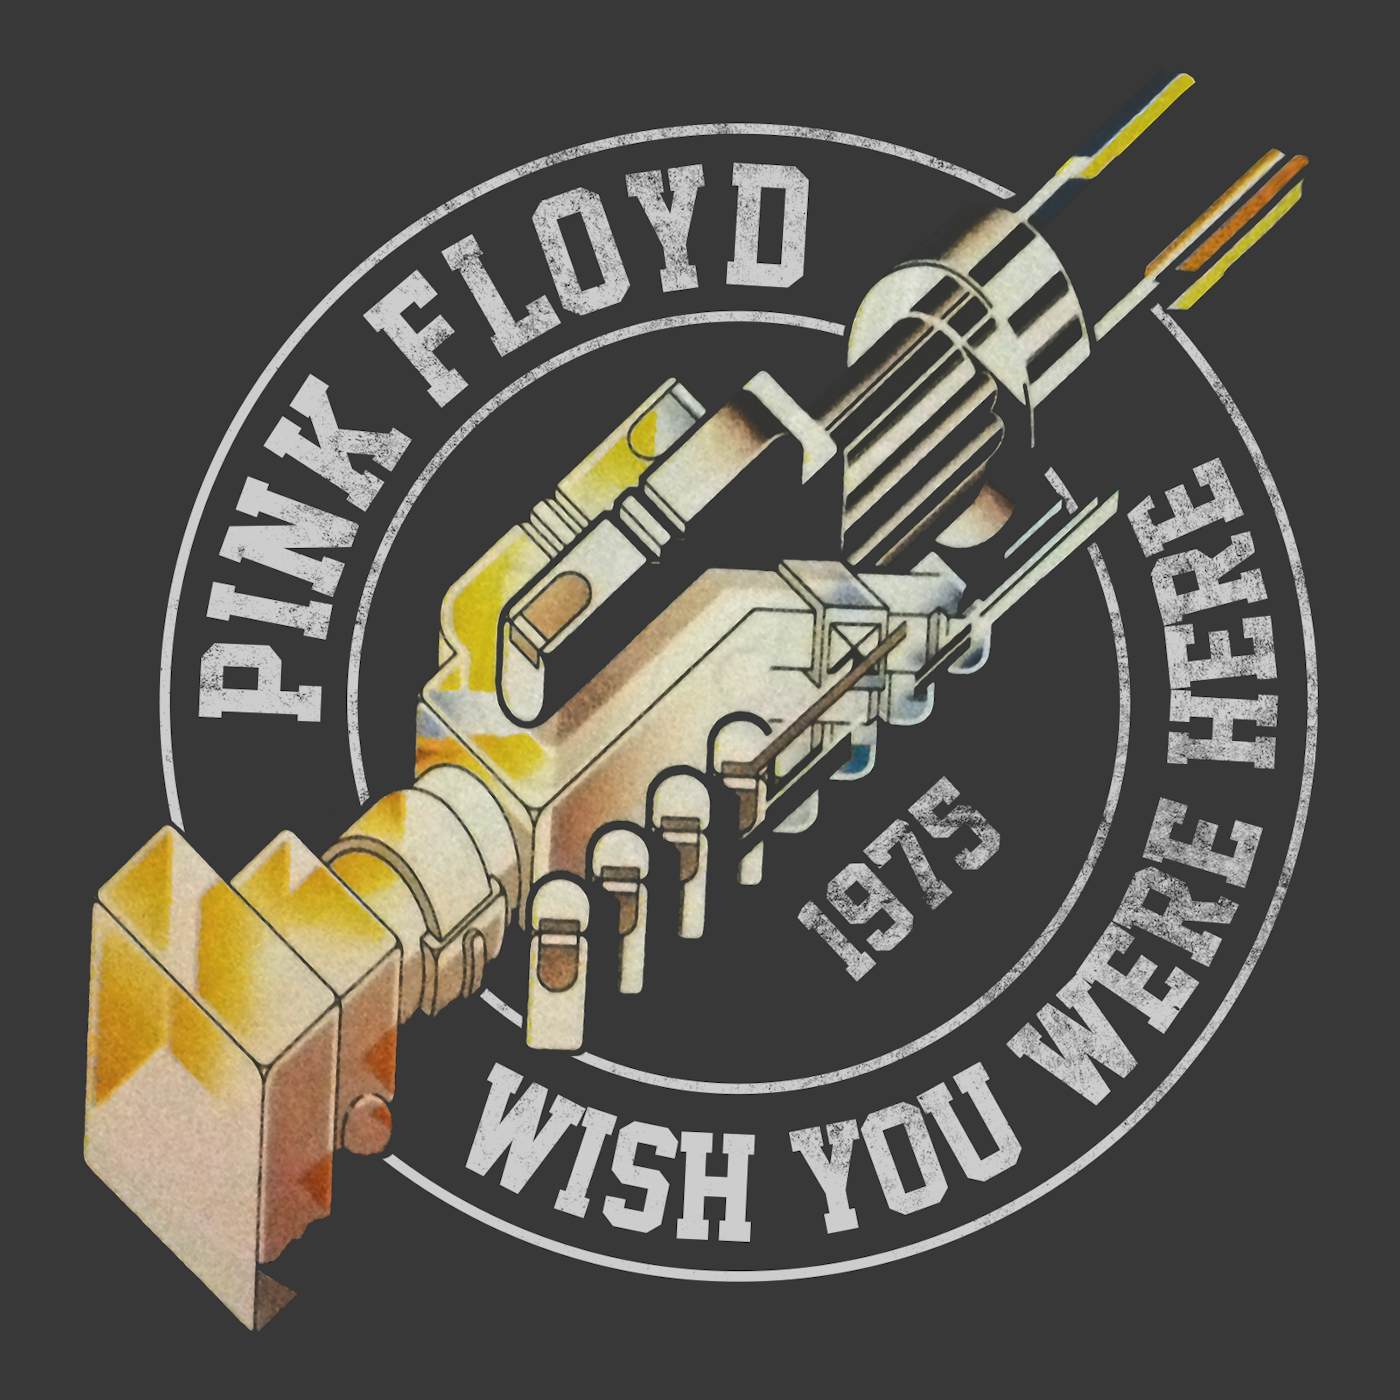 Pink Floyd T-Shirt | Watercolor Wish You Were Here Pink Floyd Shirt